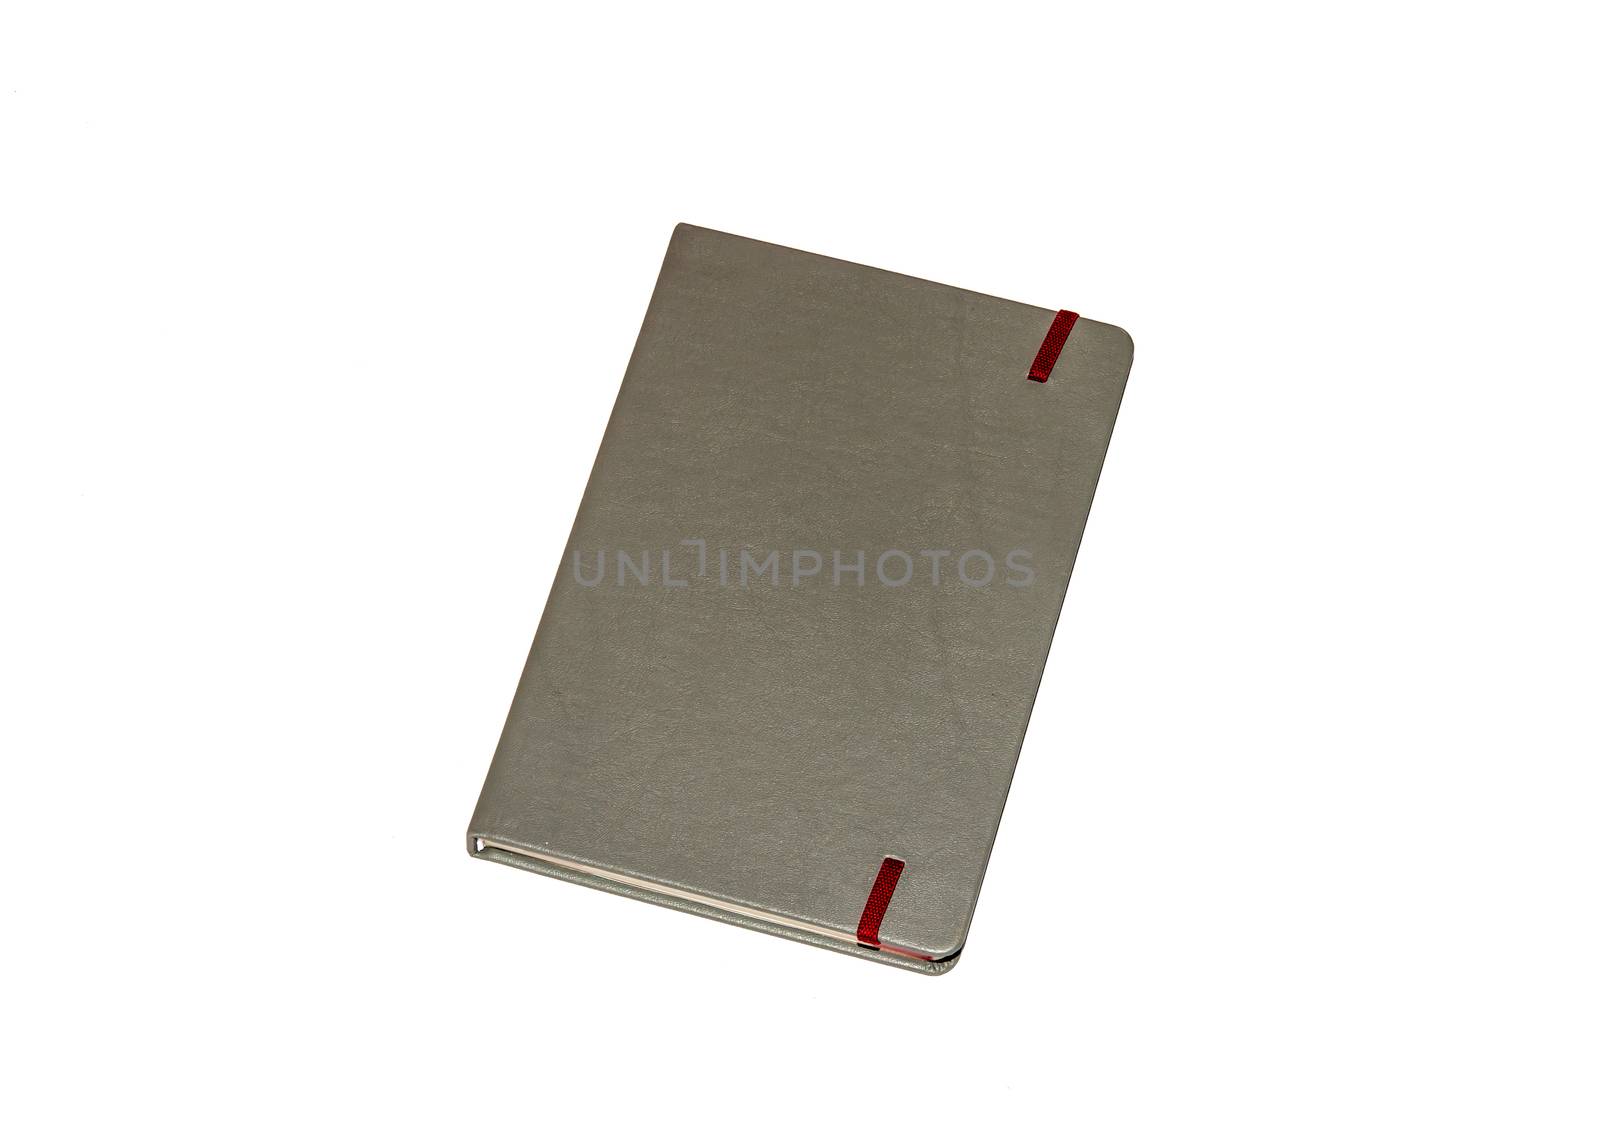 Gray put Book Isolation of a white background